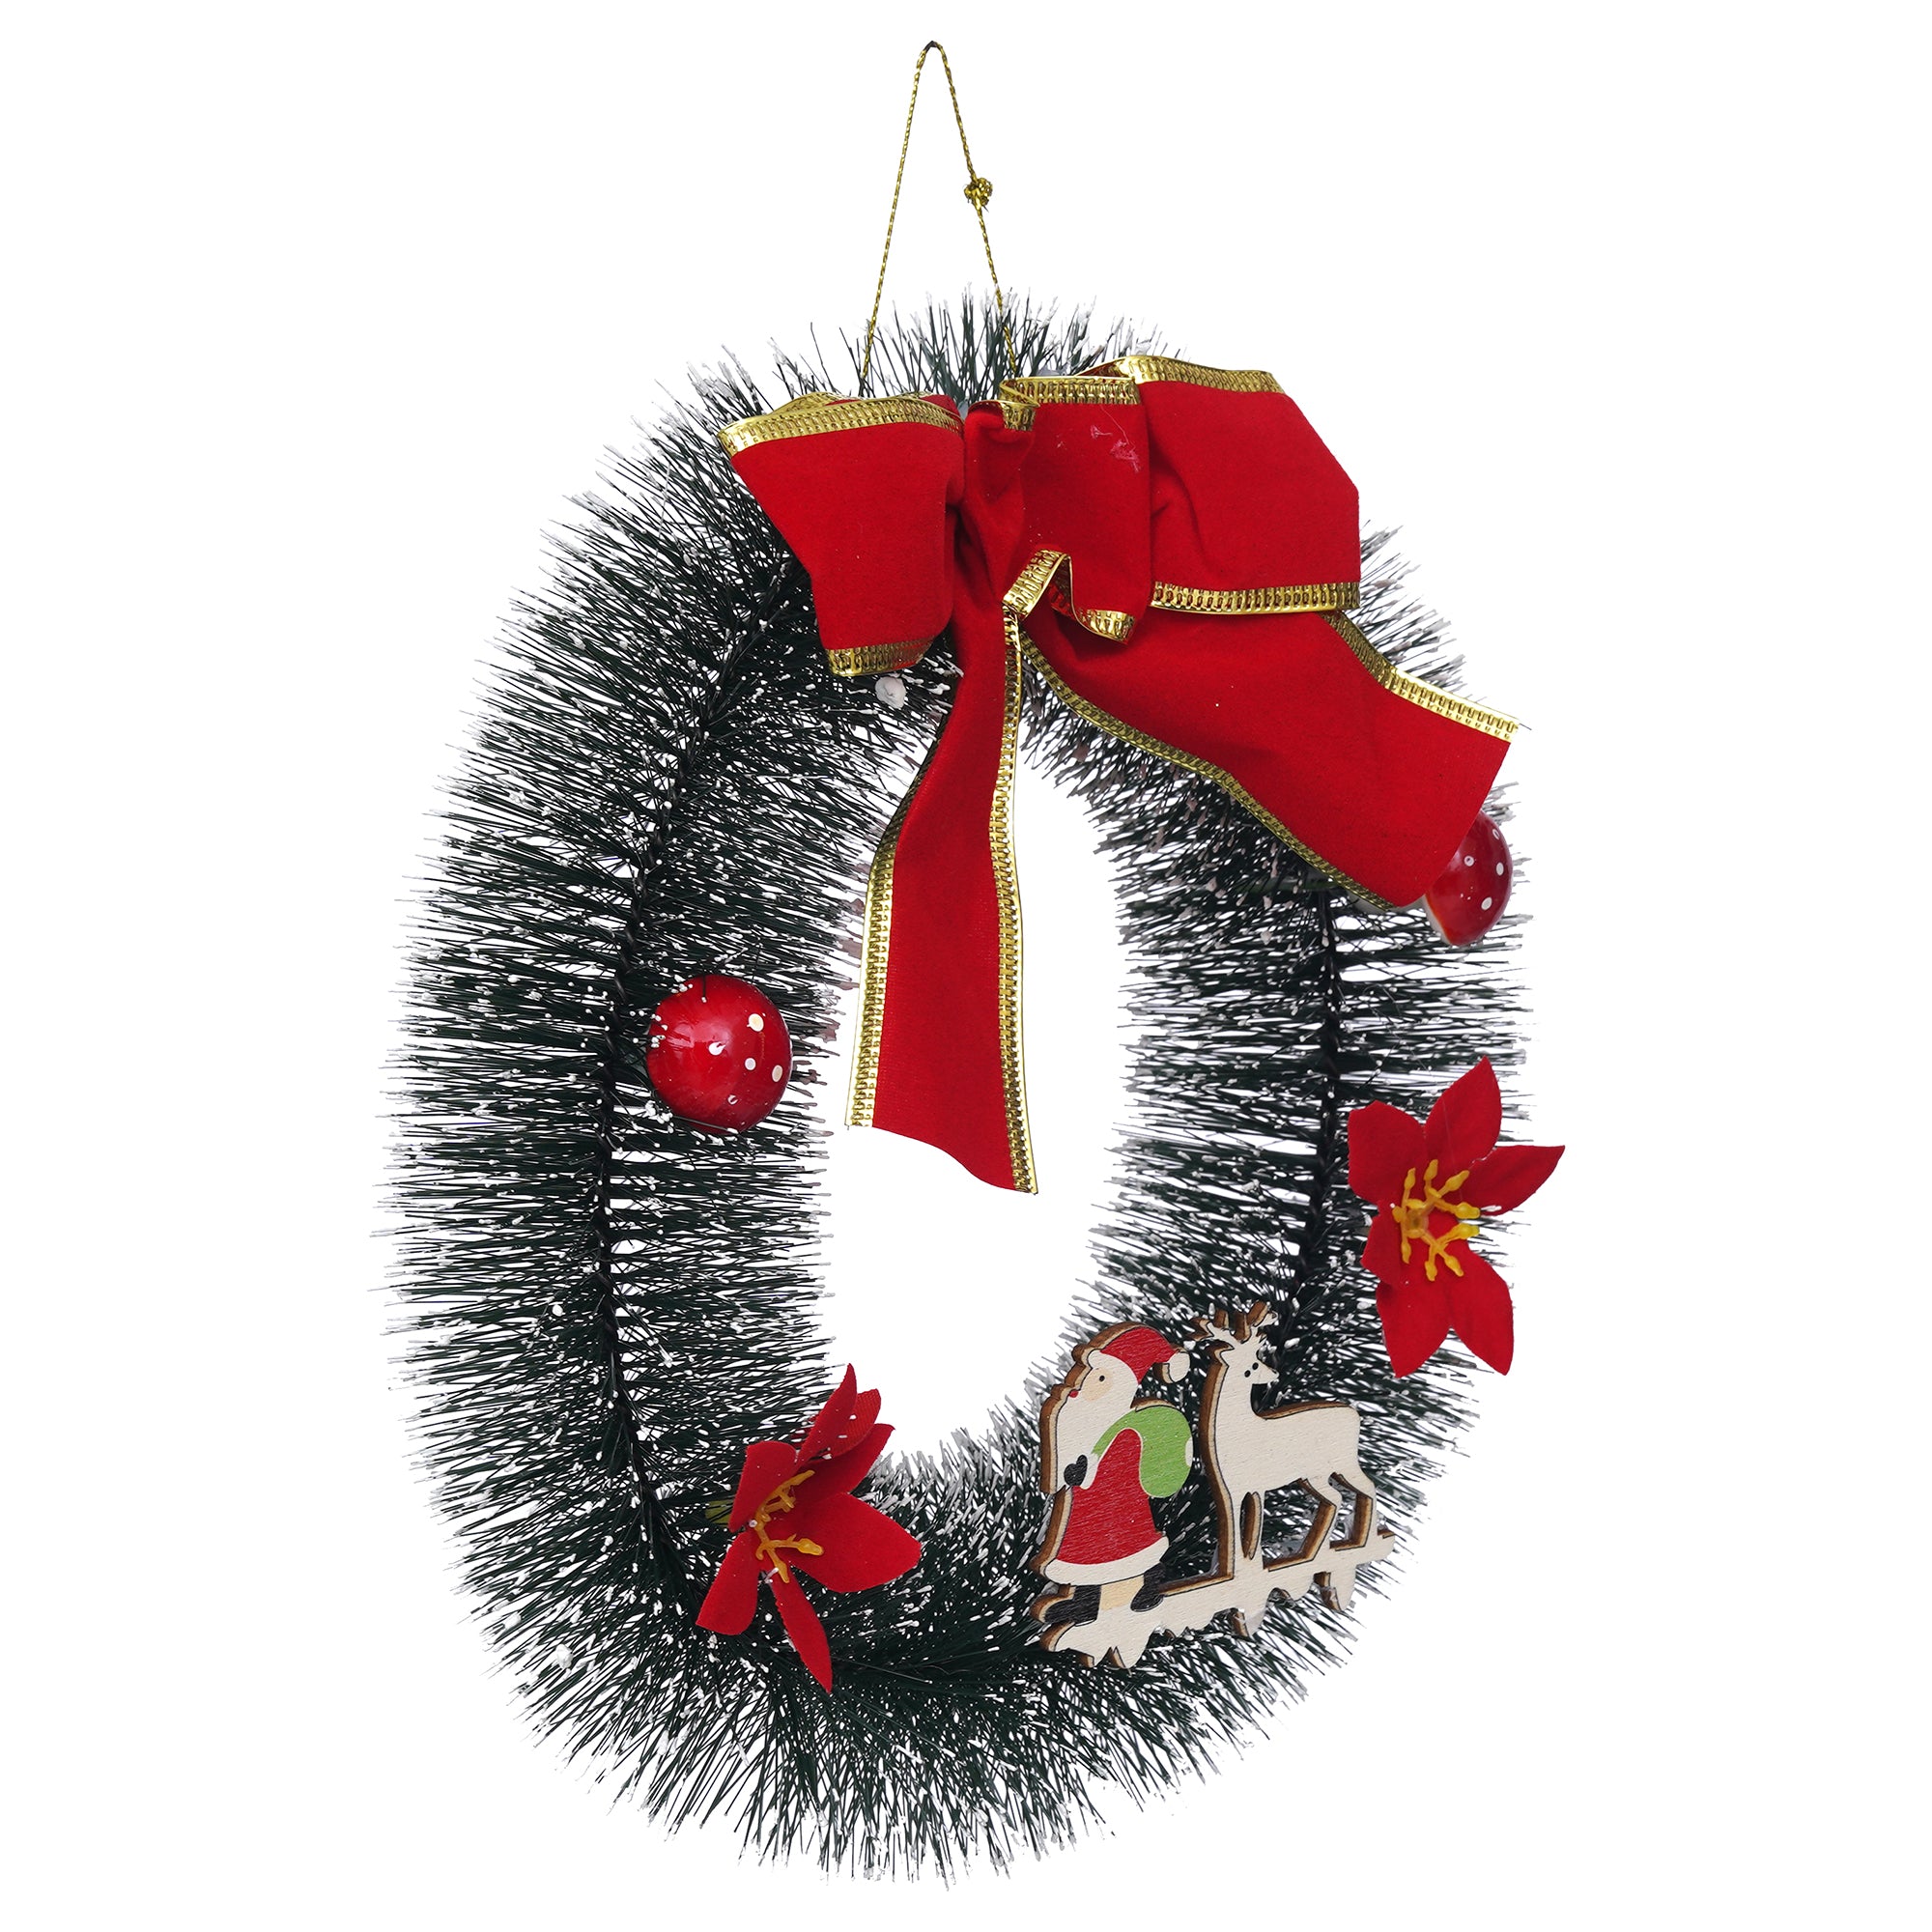 eCraftIndia Christmas Wreath with Santa Claus, Reindeer, Flower, Ball, Ribbon  Christmas Front Door Ornament and Wall Decoration  Artificial Pine Garland For Xmas Party Decor 7